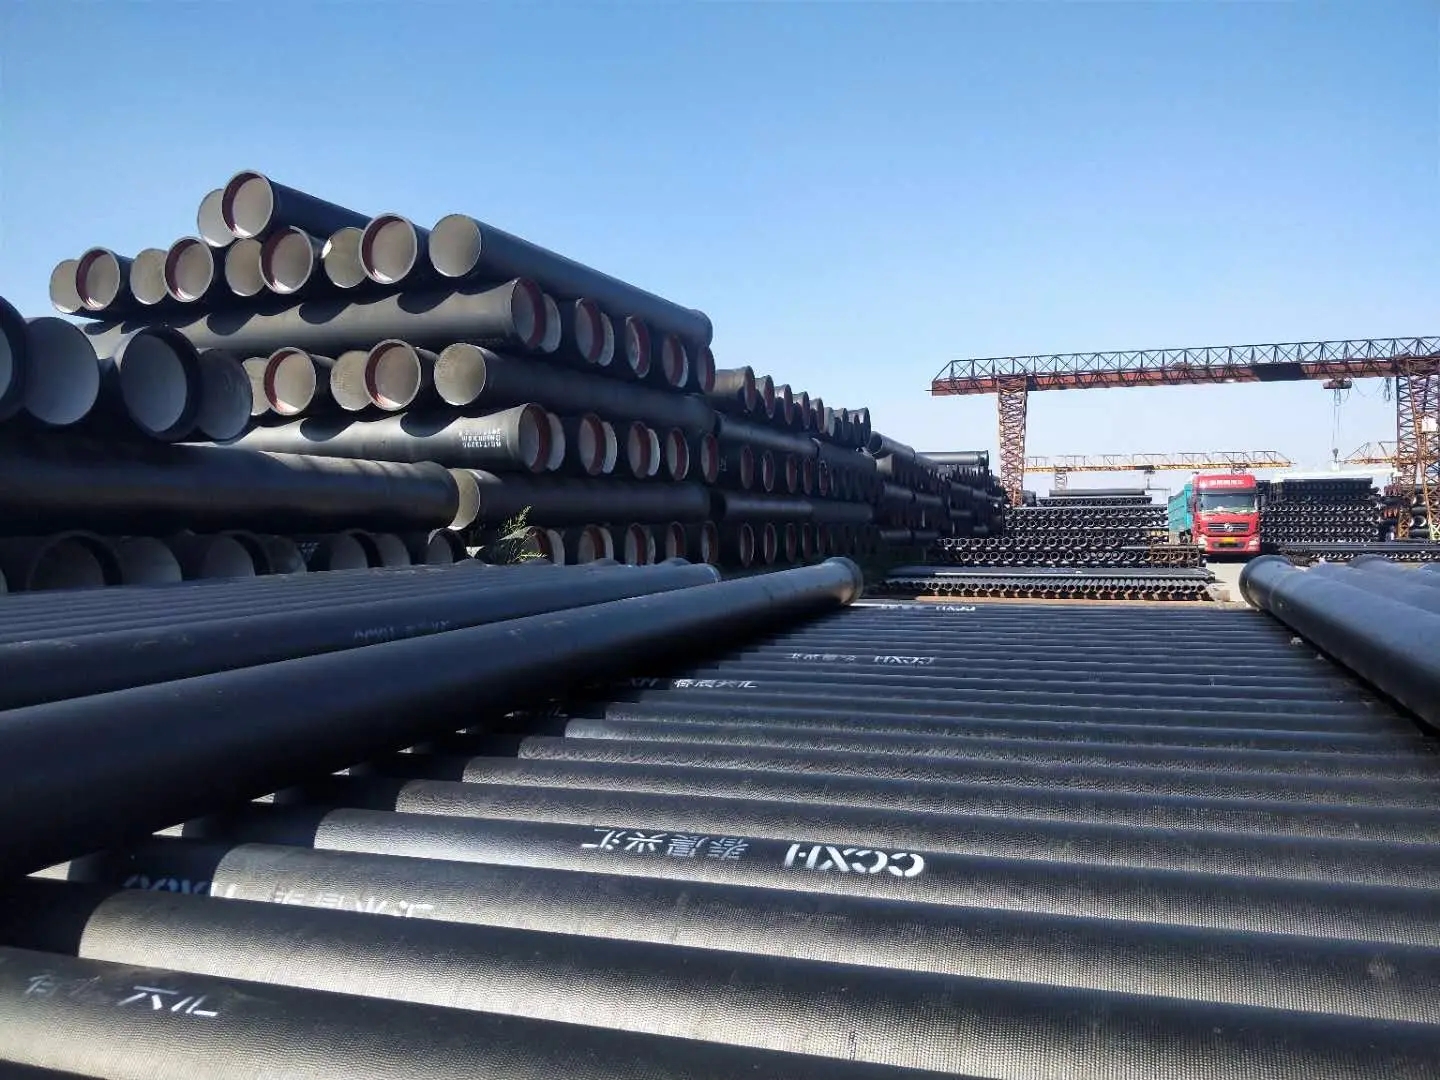 Ductile iron pipe